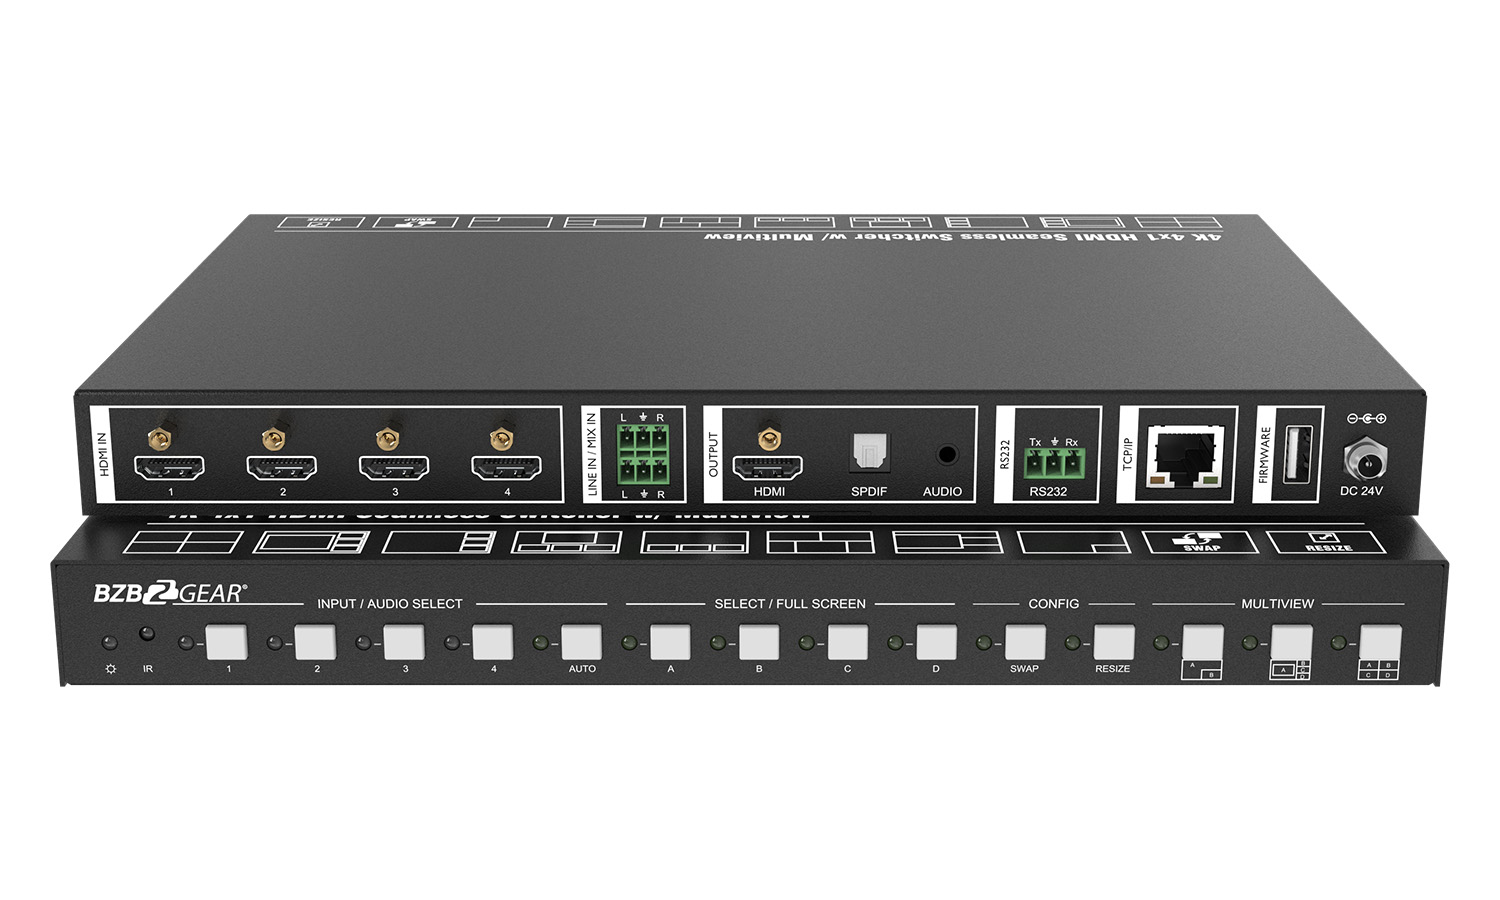 BZBGEAR BG-UMV-HA41 4X1 4K HDMI Seamless Switcher/Scaler with Audio and Multiview